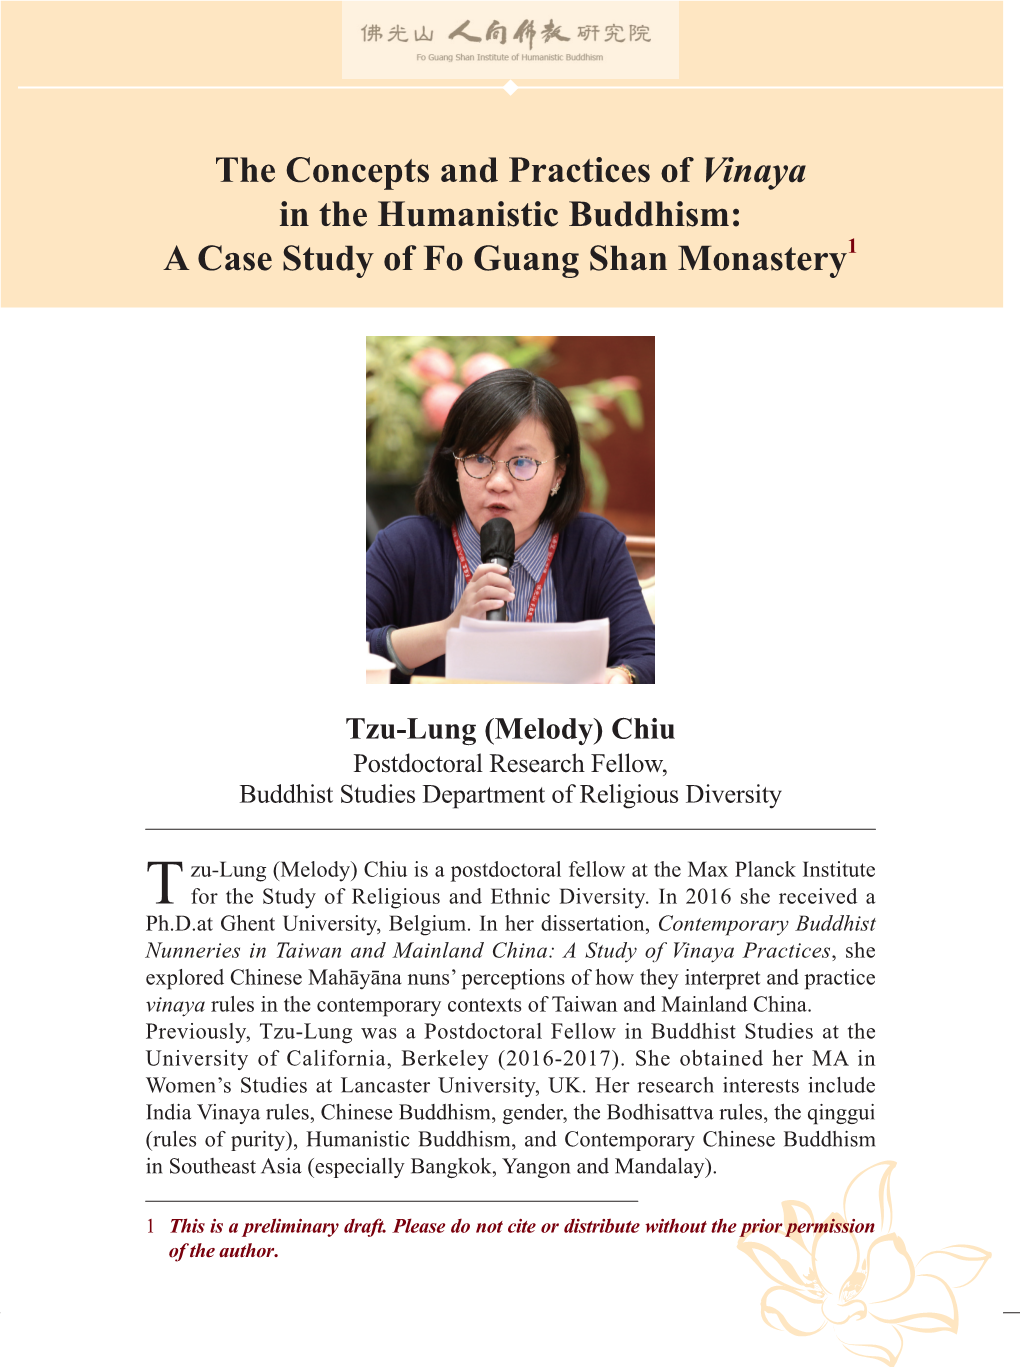 The Concepts and Practices of Vinaya in the Humanistic Buddhism: a Case Study of Fo Guang Shan Monastery1